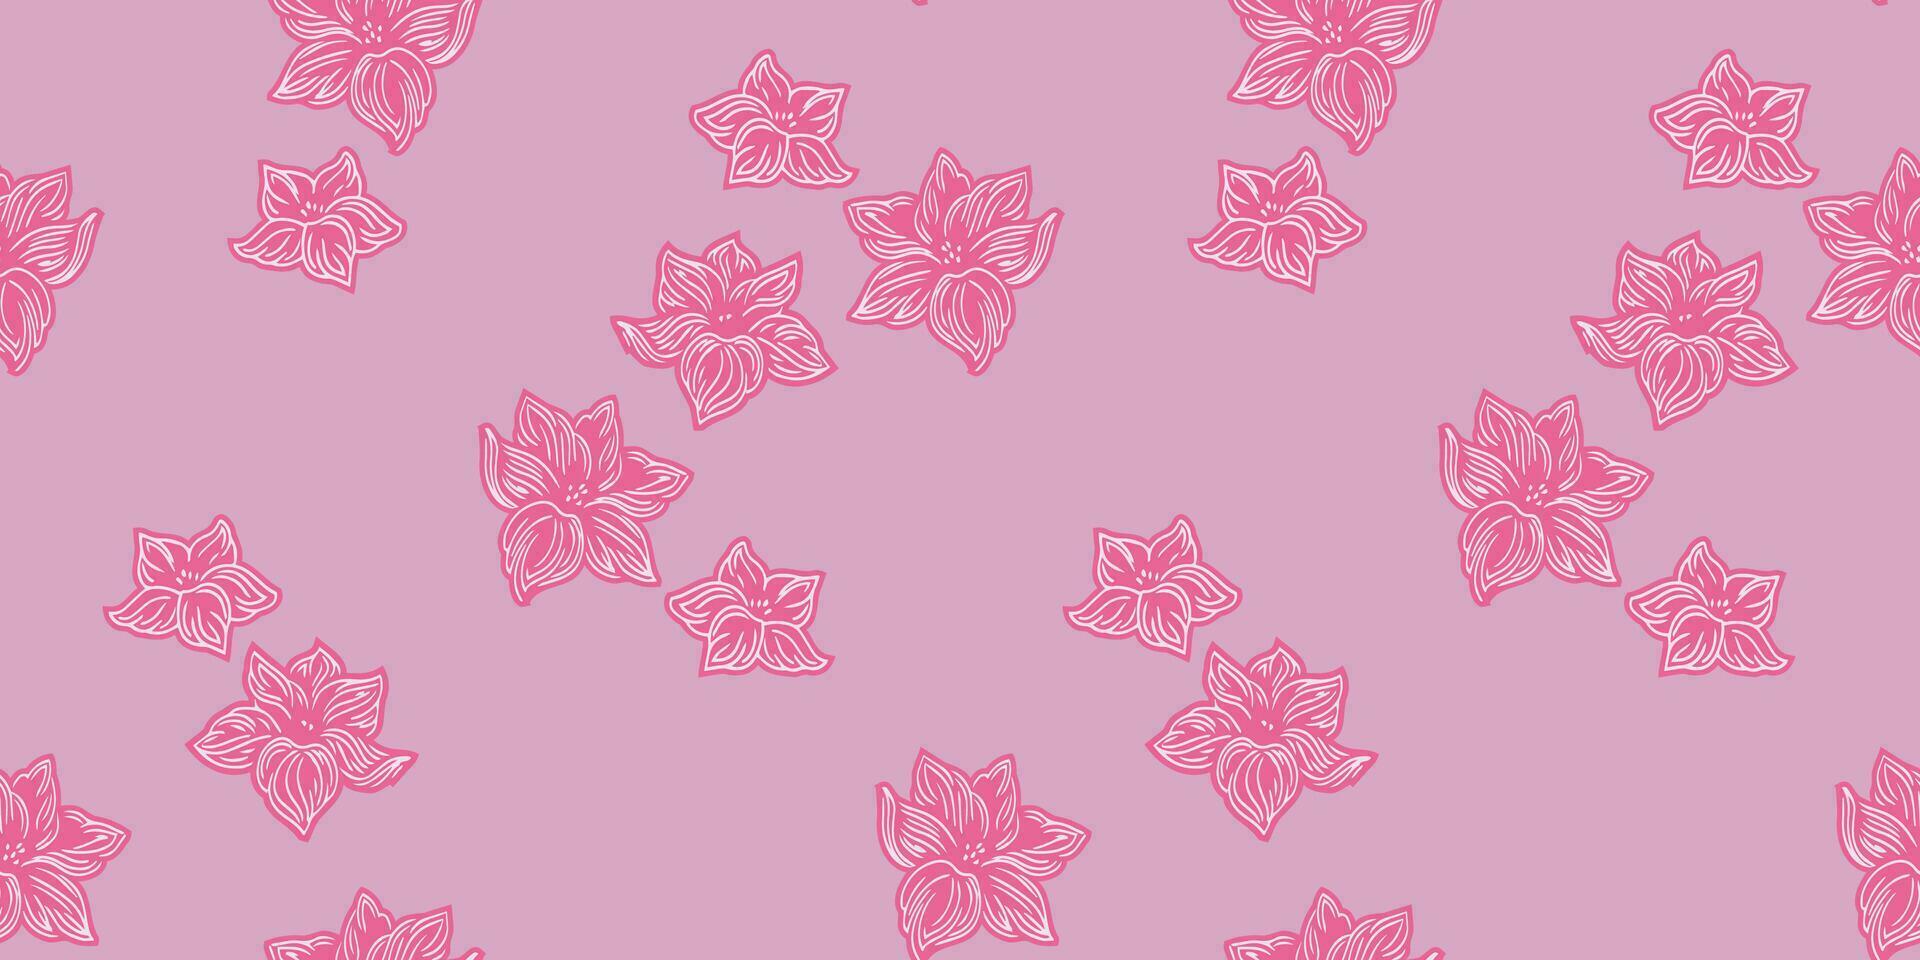 Pastel seamless pattern with decorative stylized shape flowers. Vector hand drawn. Simple purple abstract  floral background. Design for fashion, textile, fabric, wallpaper, surface design